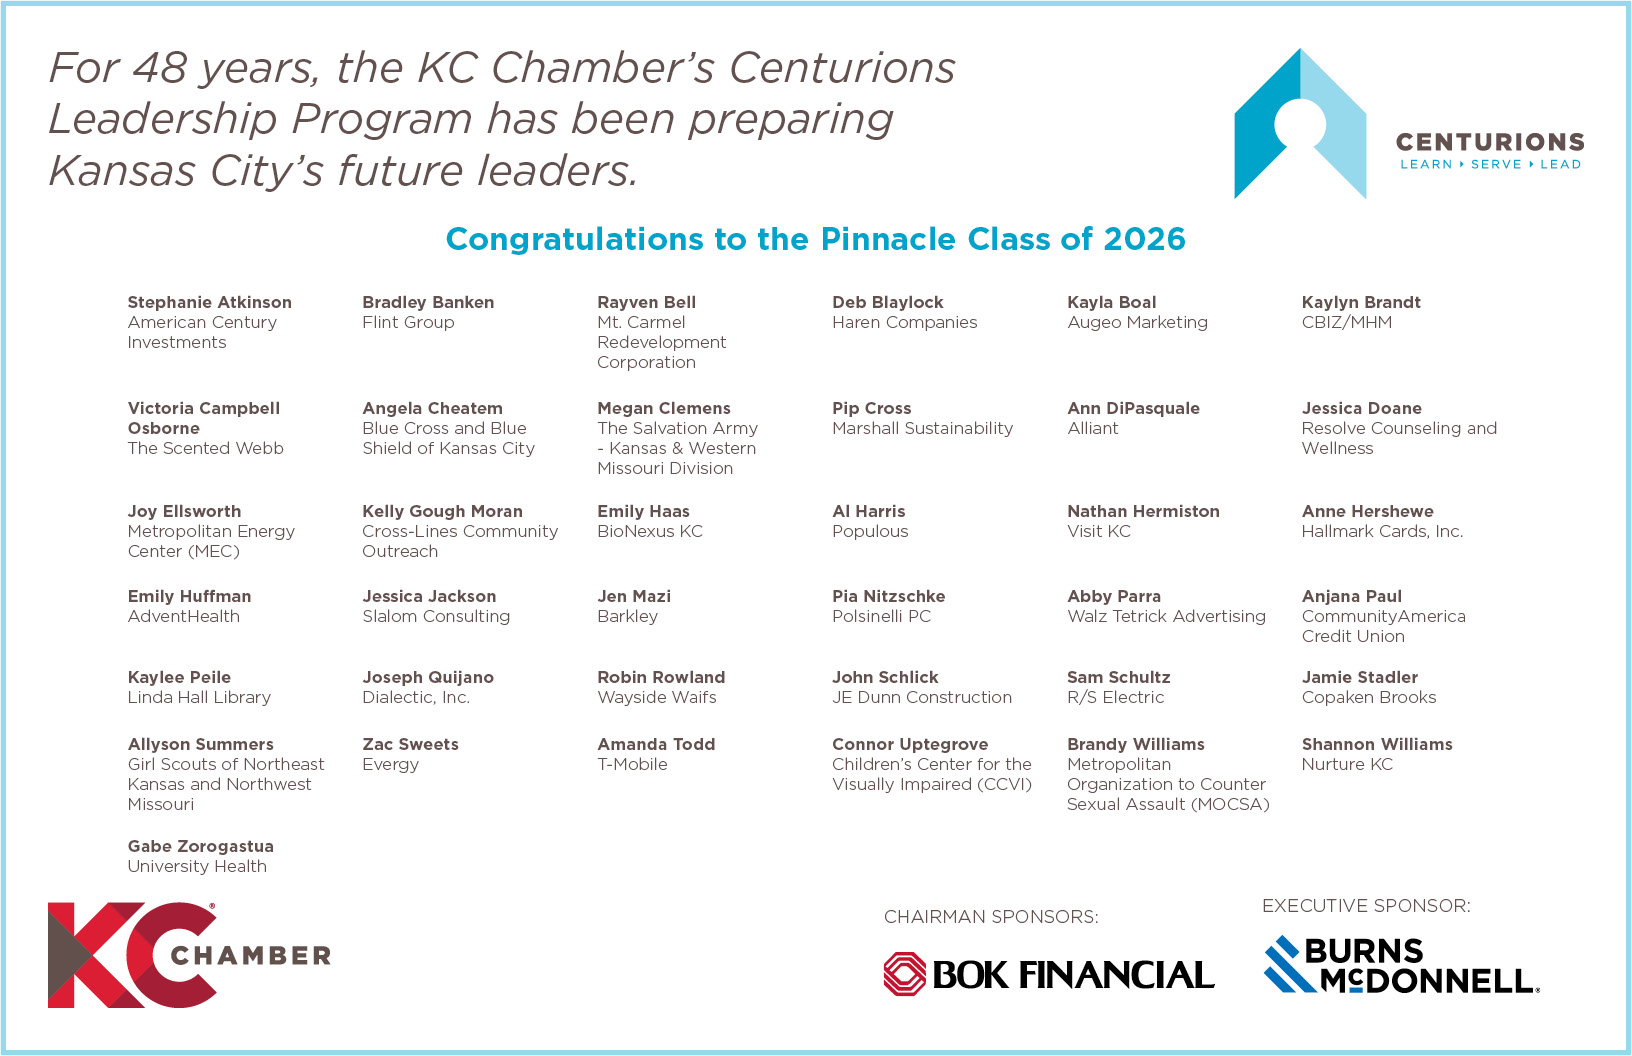 Congratulations graphic listing members of the Centurions Pinnacle Class of 2026